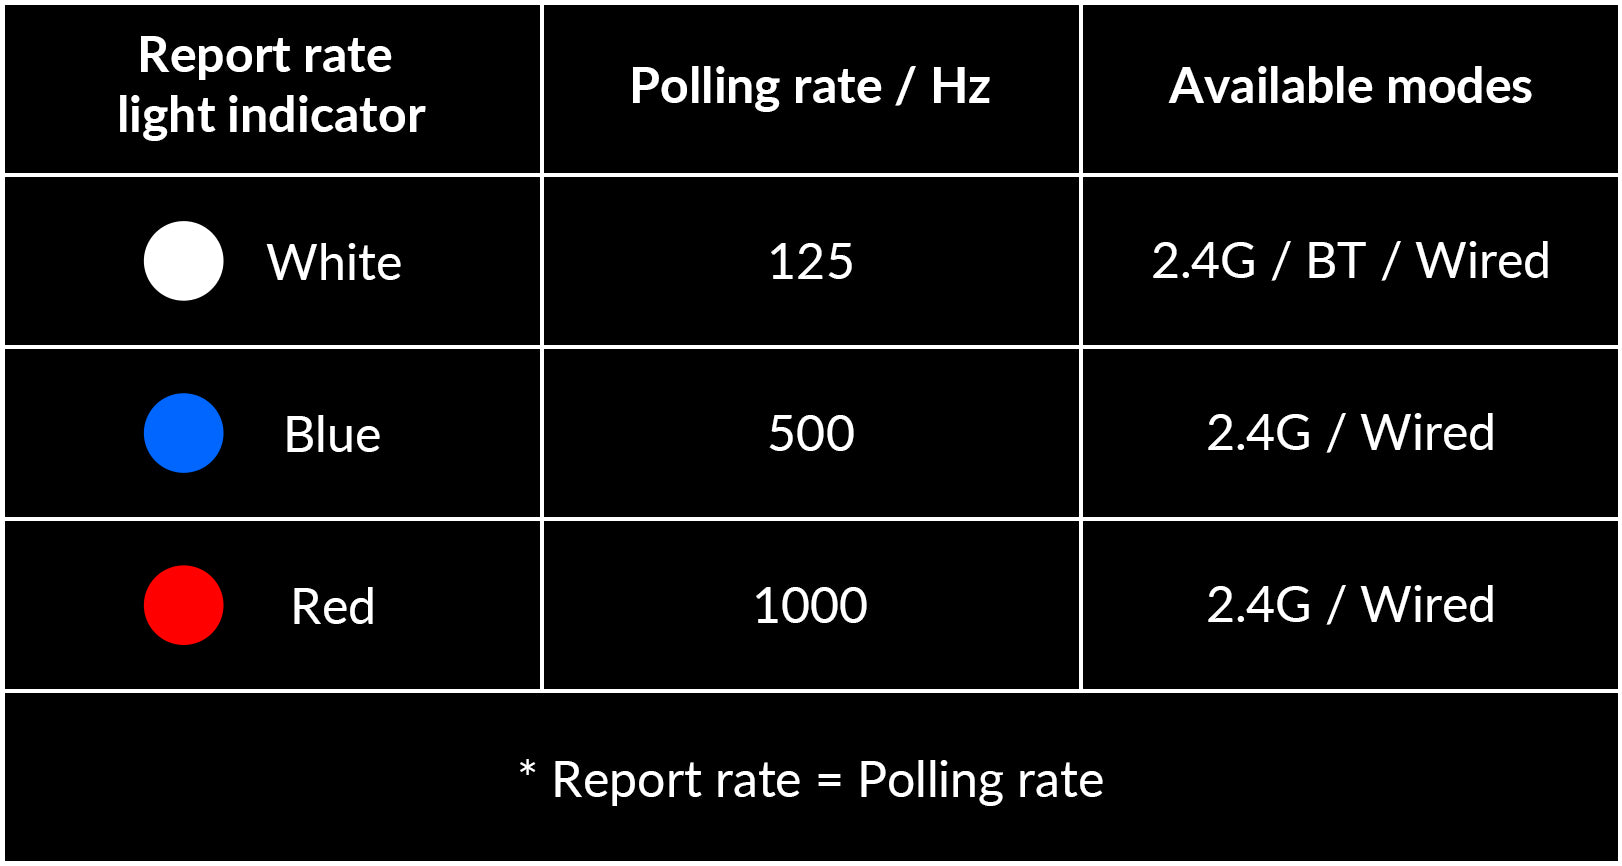 Report rate setting of the M4 with 1000 Hz polling rate